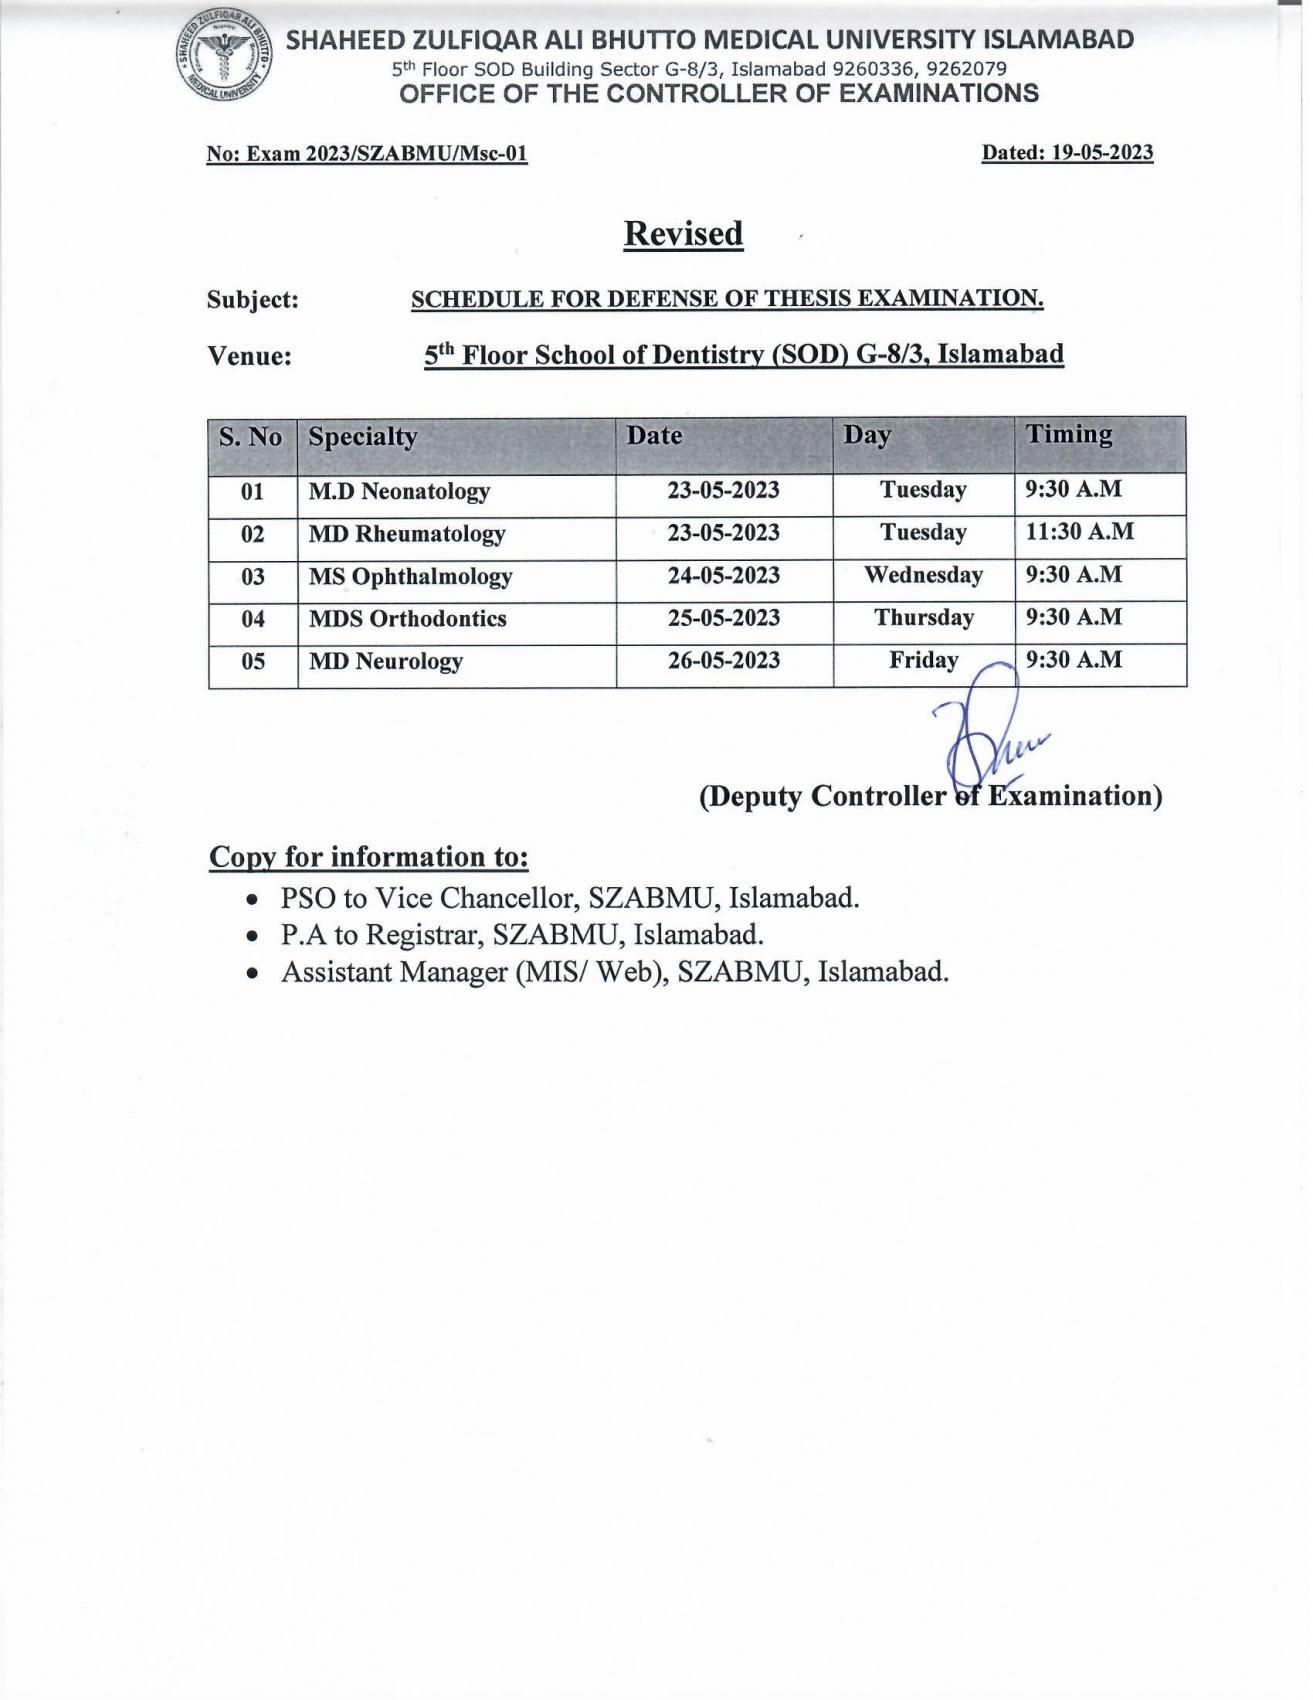 Revised Schedule for Defense of Thesis Examinations